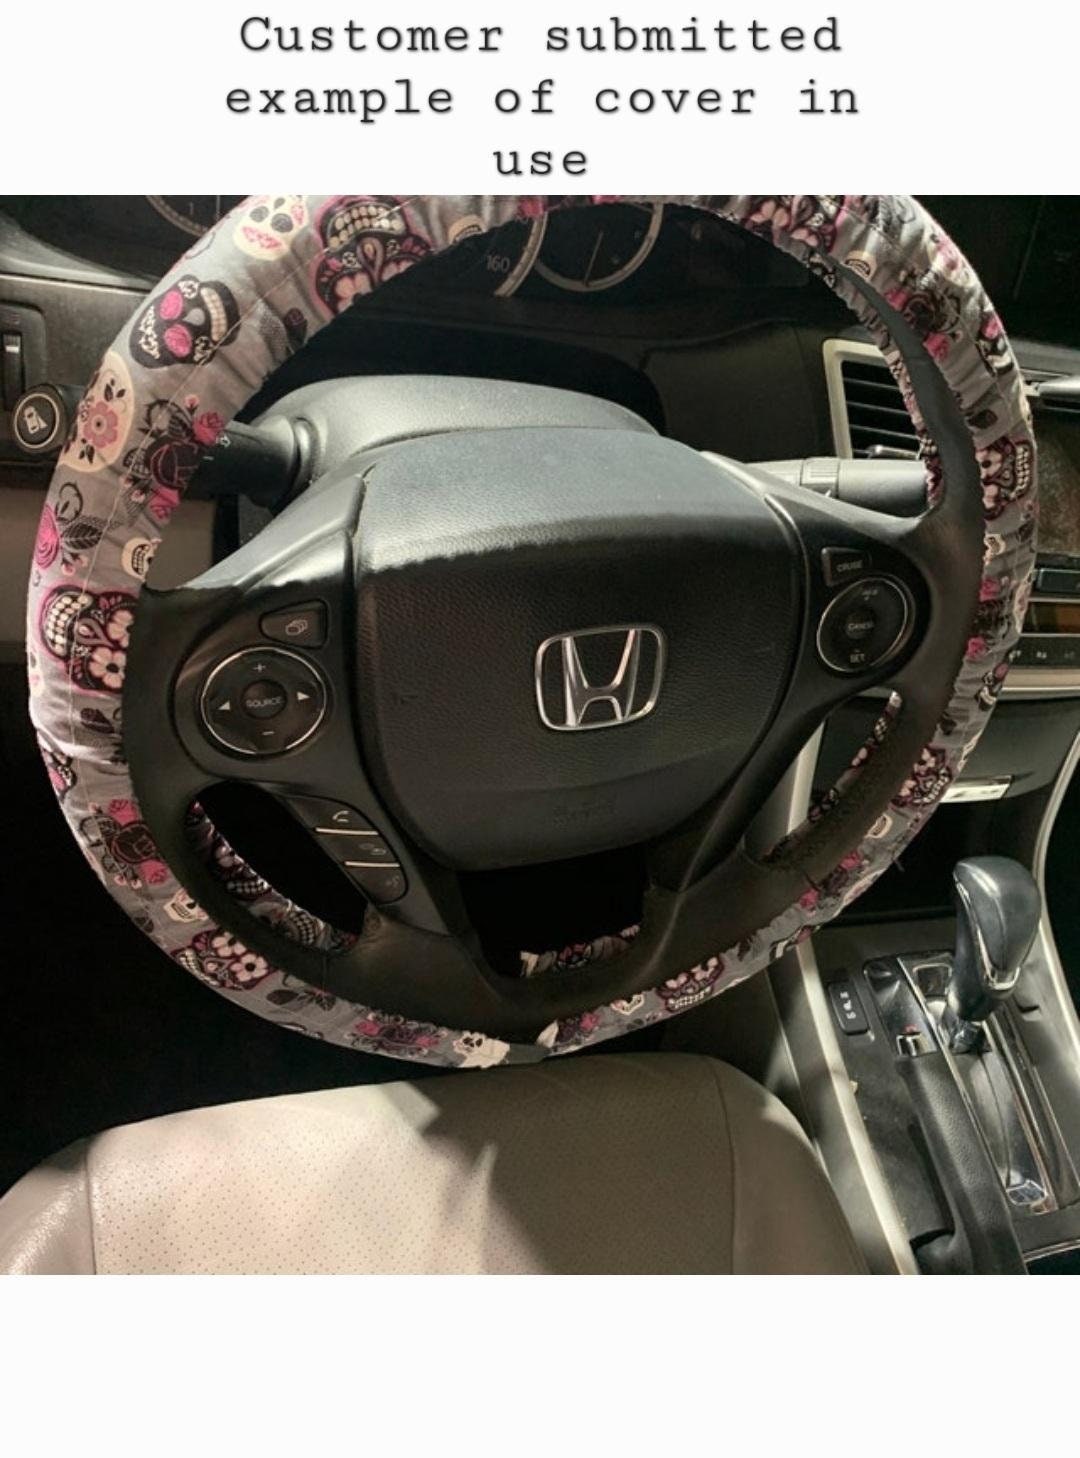 Sunset Floral Steering Wheel Cover, 100% Cotton, Washable, Custom Car Accessories - Harlow's Store and Garden Gifts